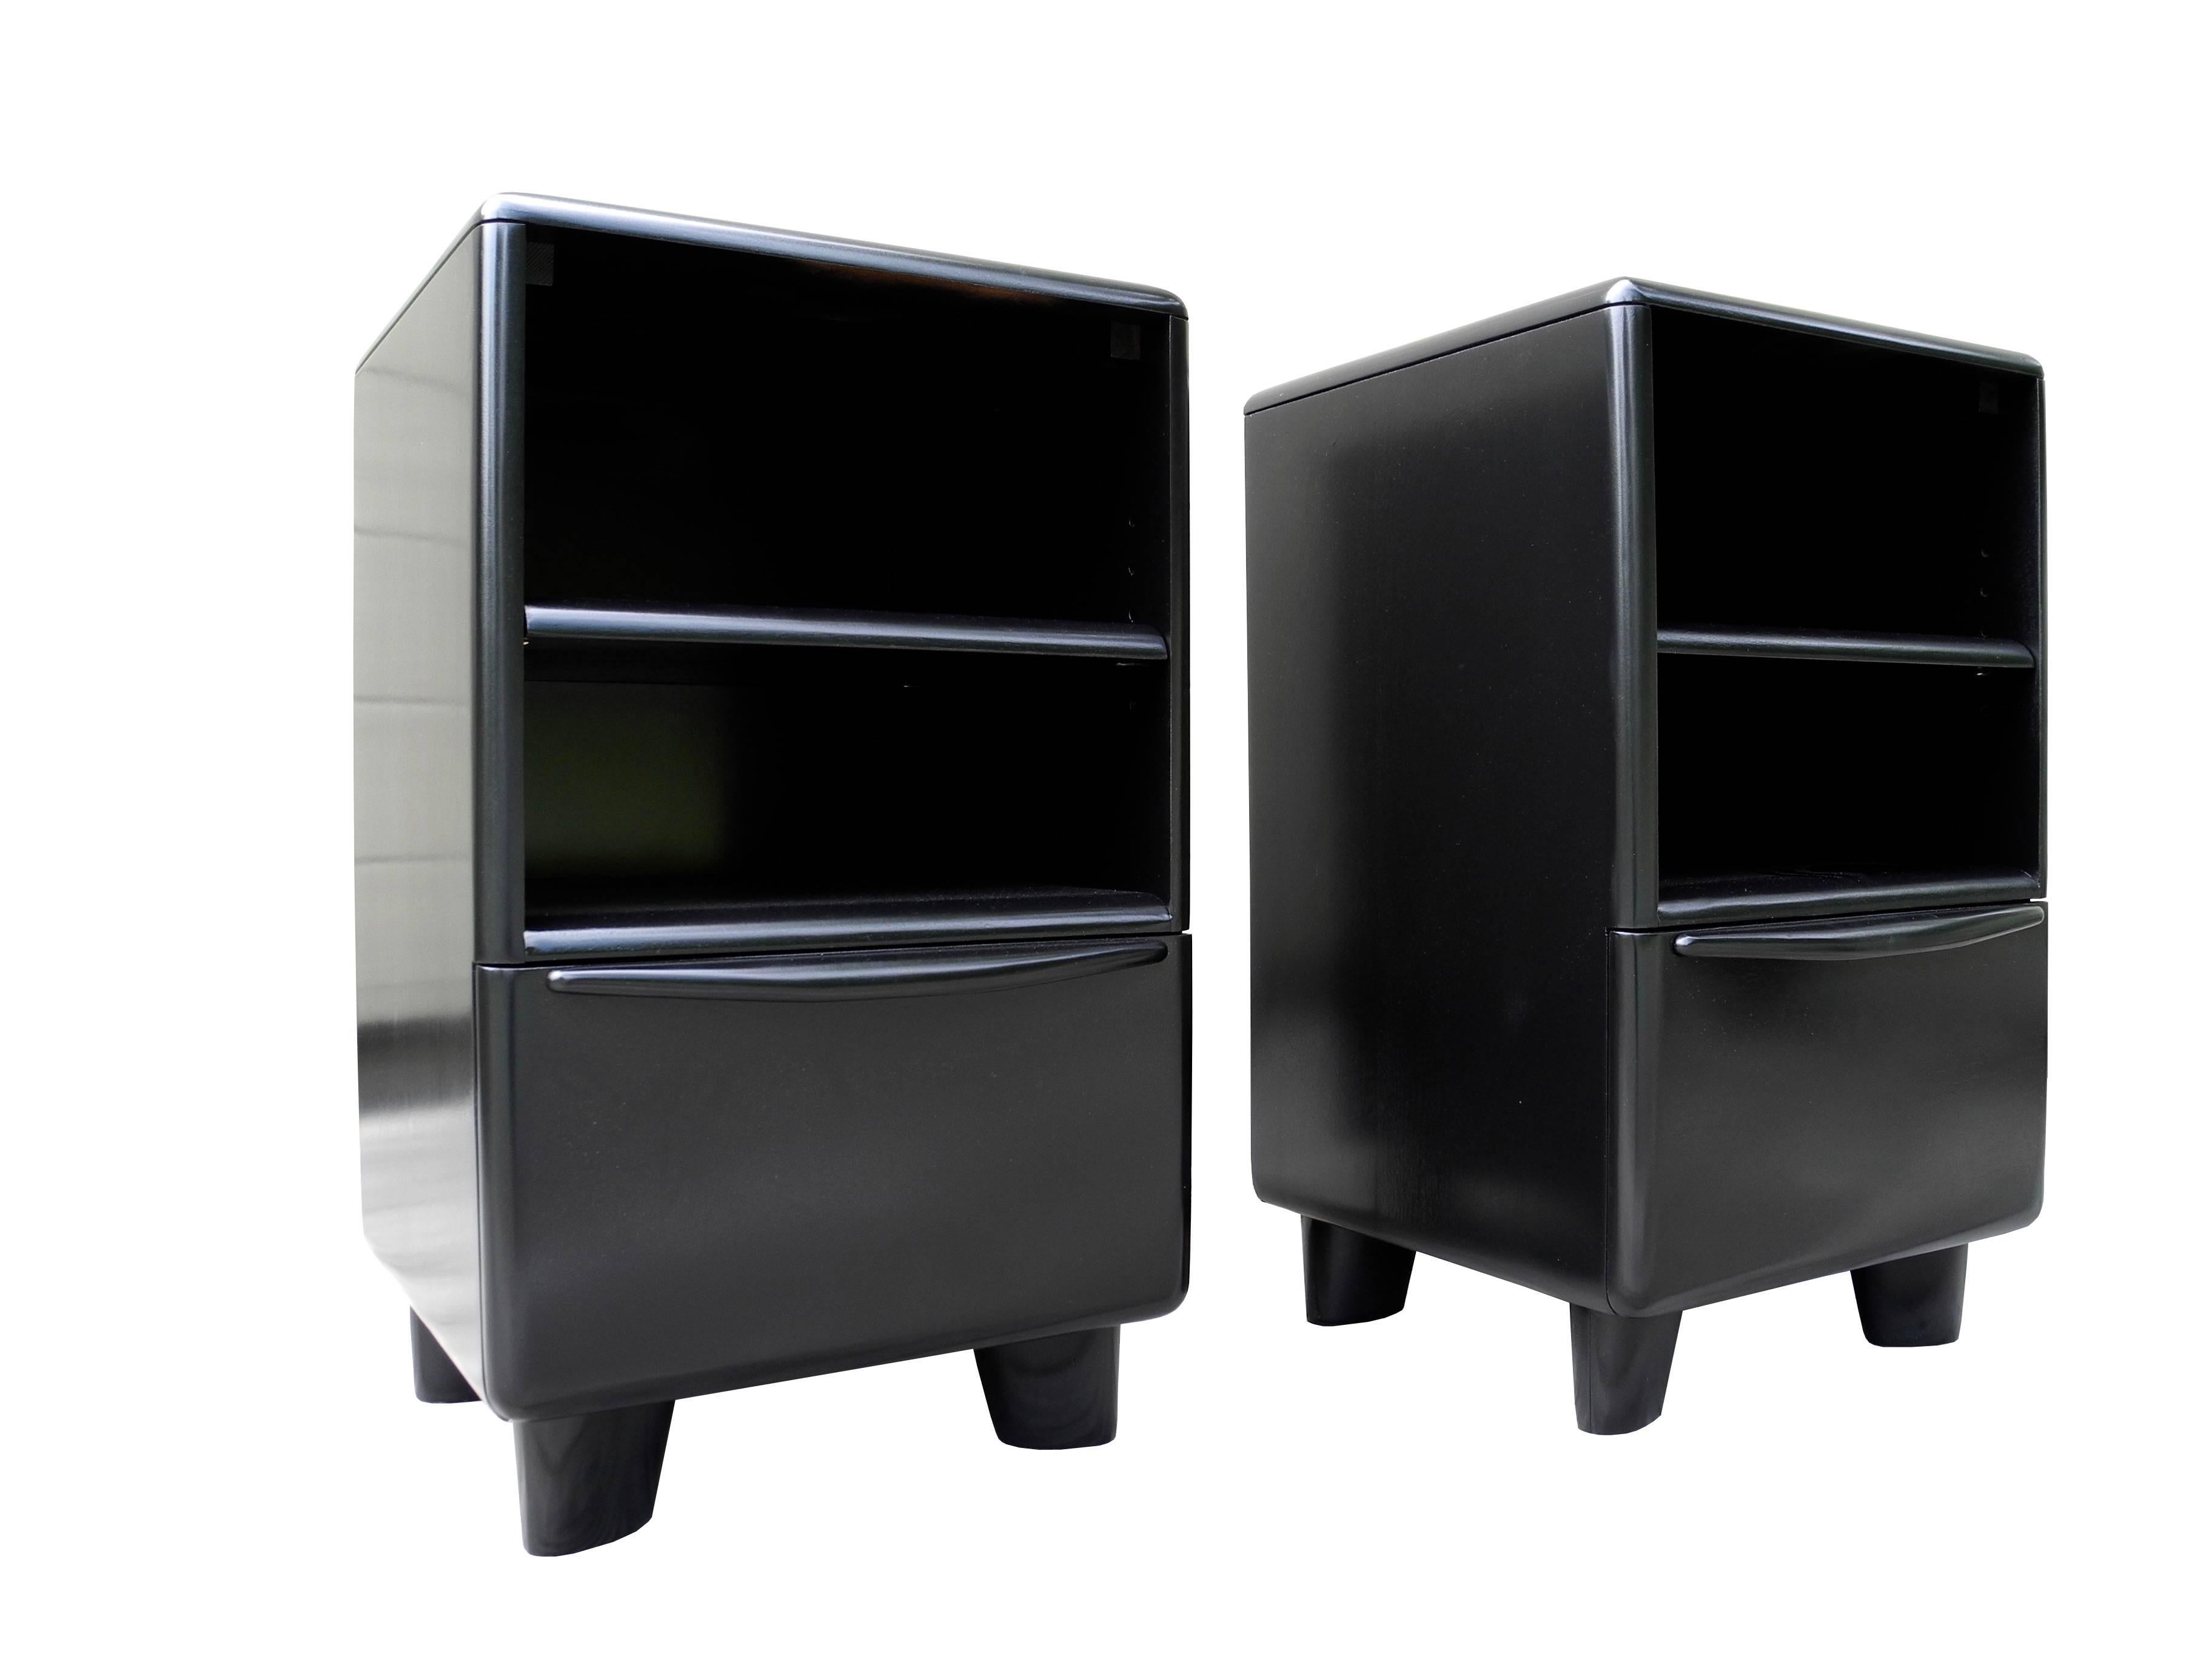 These Mid-Century Modern pair of solid maple bedside tables/nightstands are painted black and lacquered. They have a bottom drawer and adjustable shelf. Their simple design and organic rounded edges depicts the modern style of the 1950s.